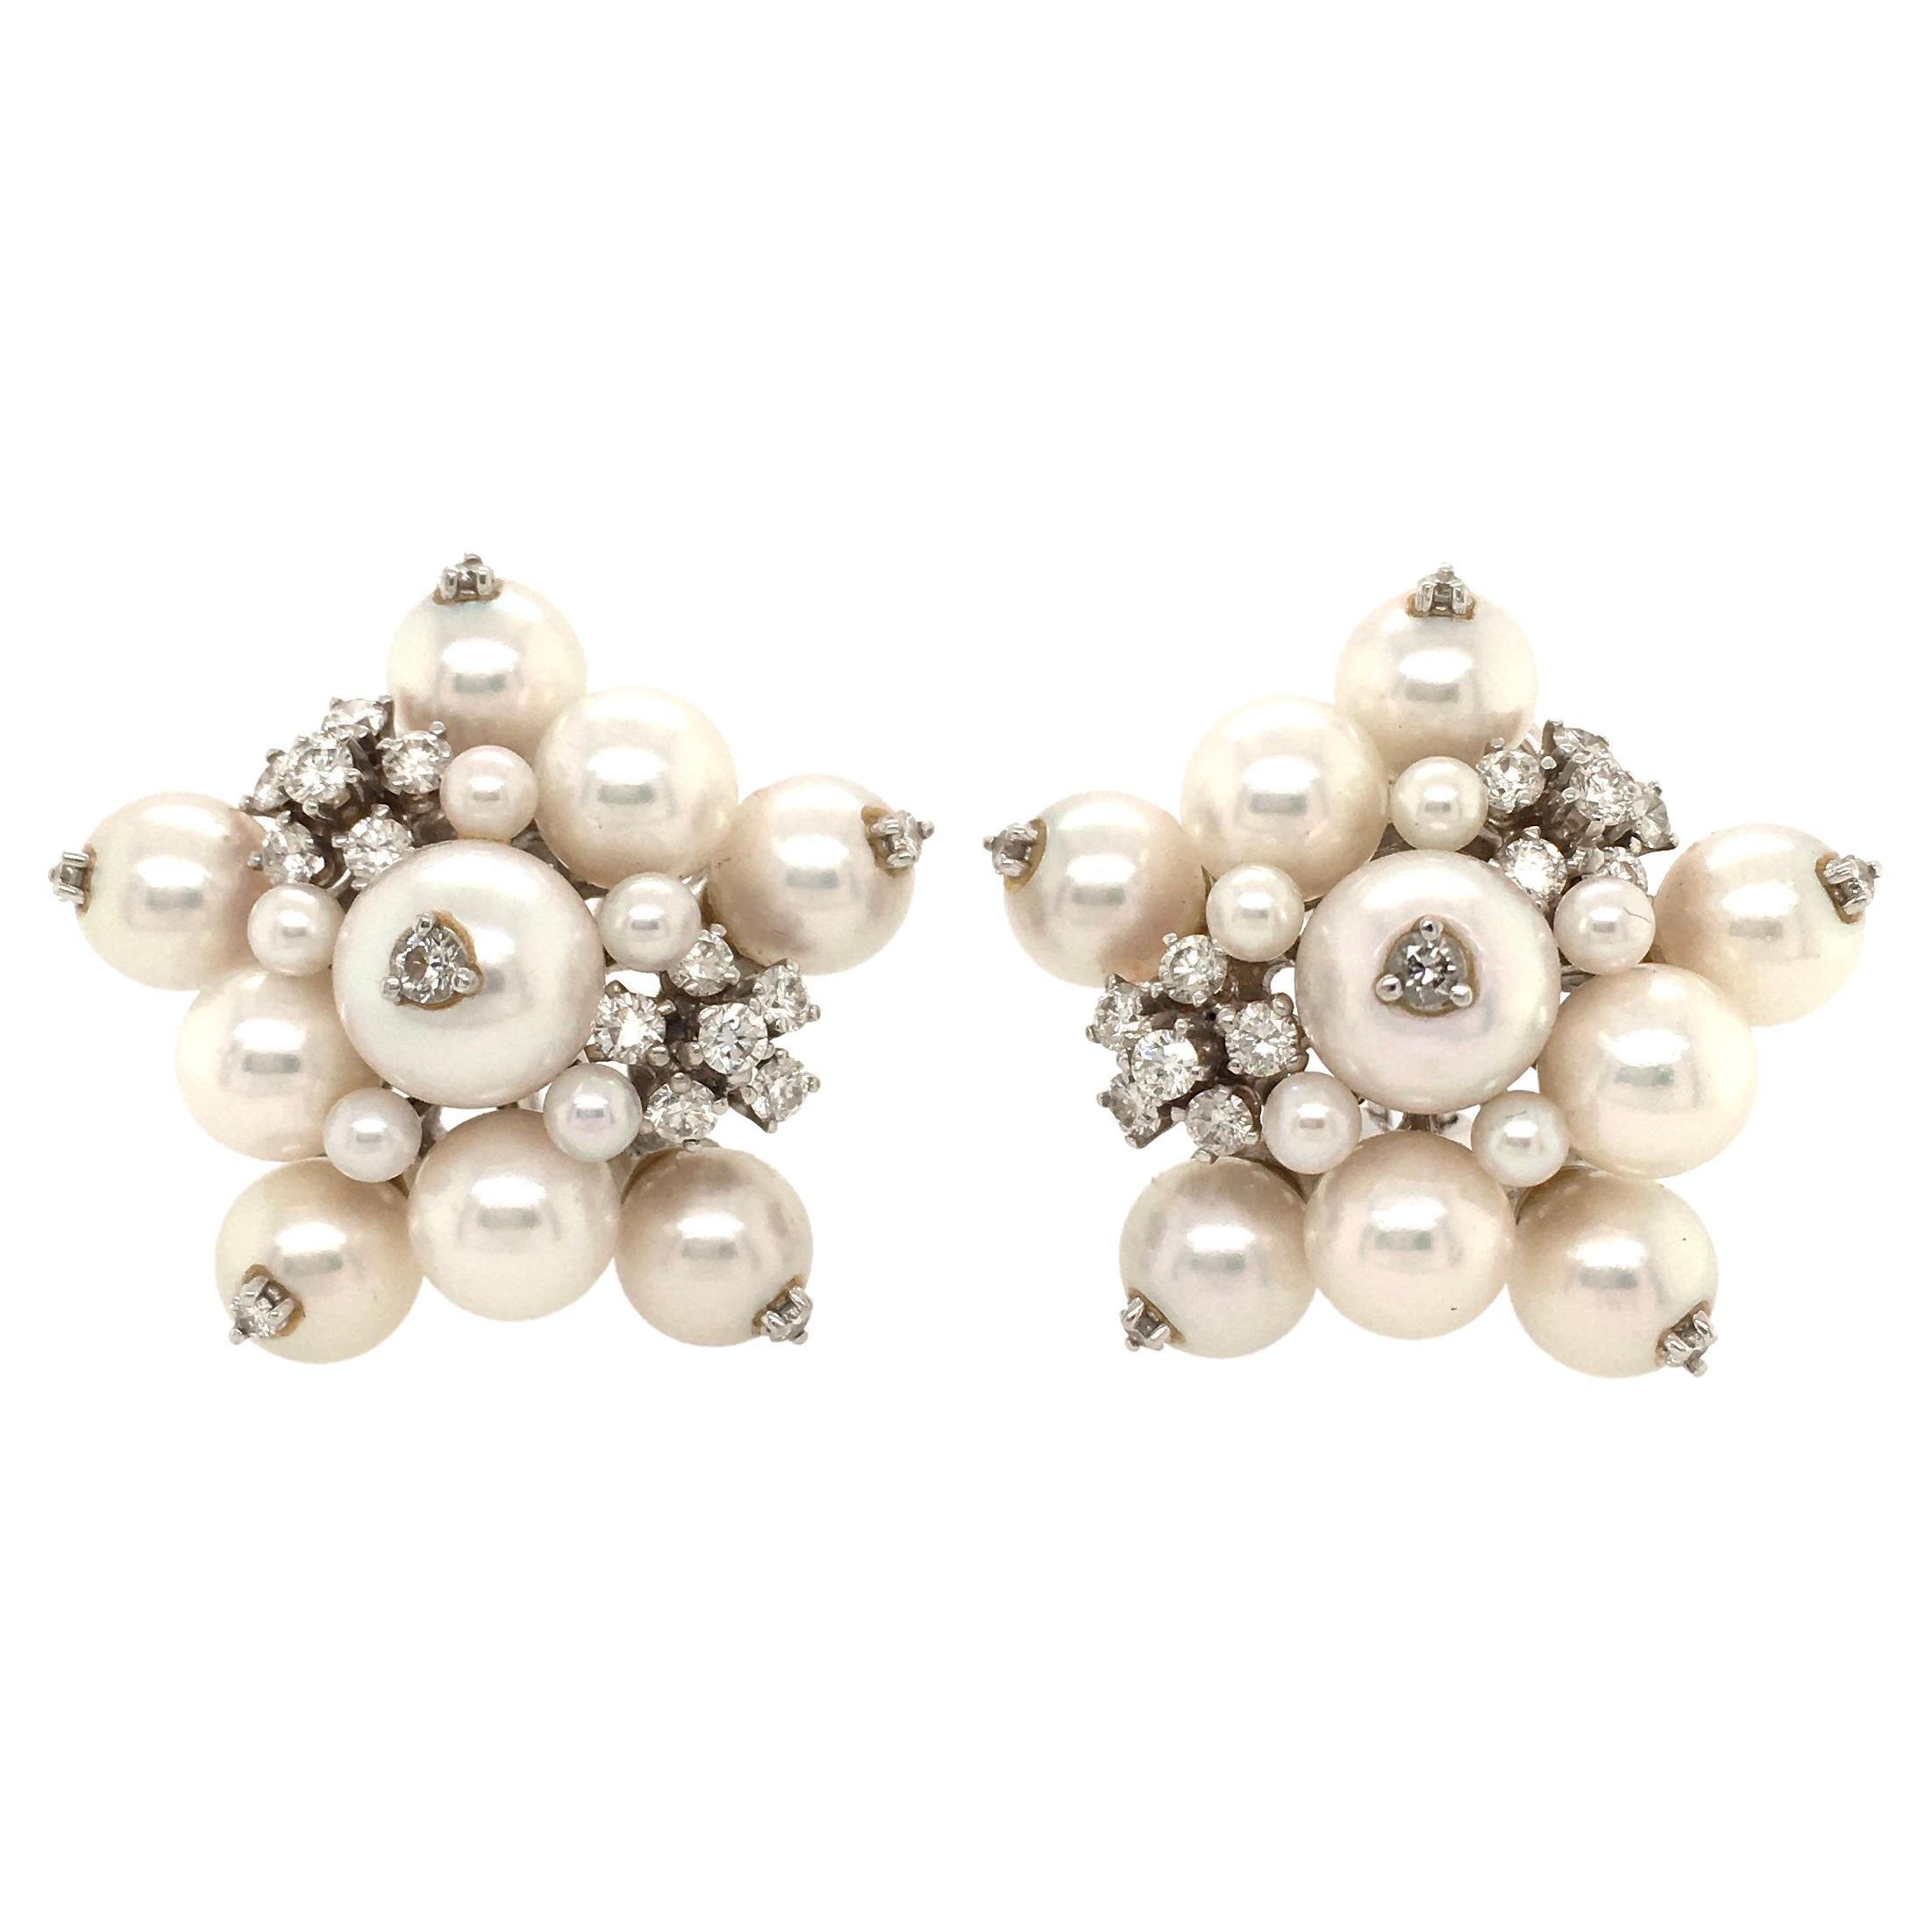 Seaman Schepps White Gold, Pearl and Diamond Earrings